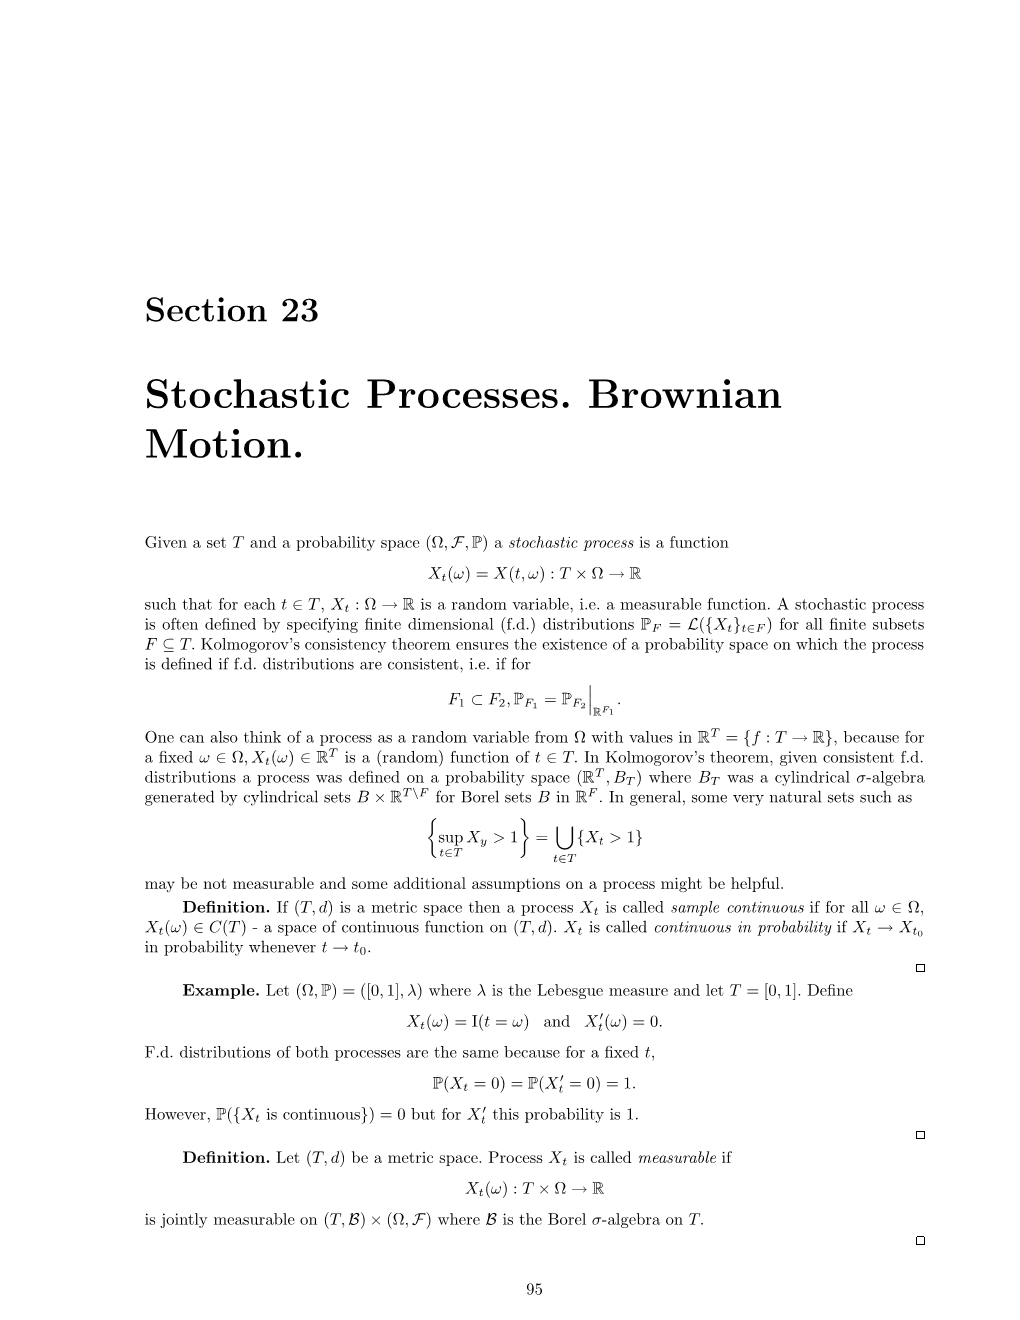 Stochastic Processes. Brownian Motion